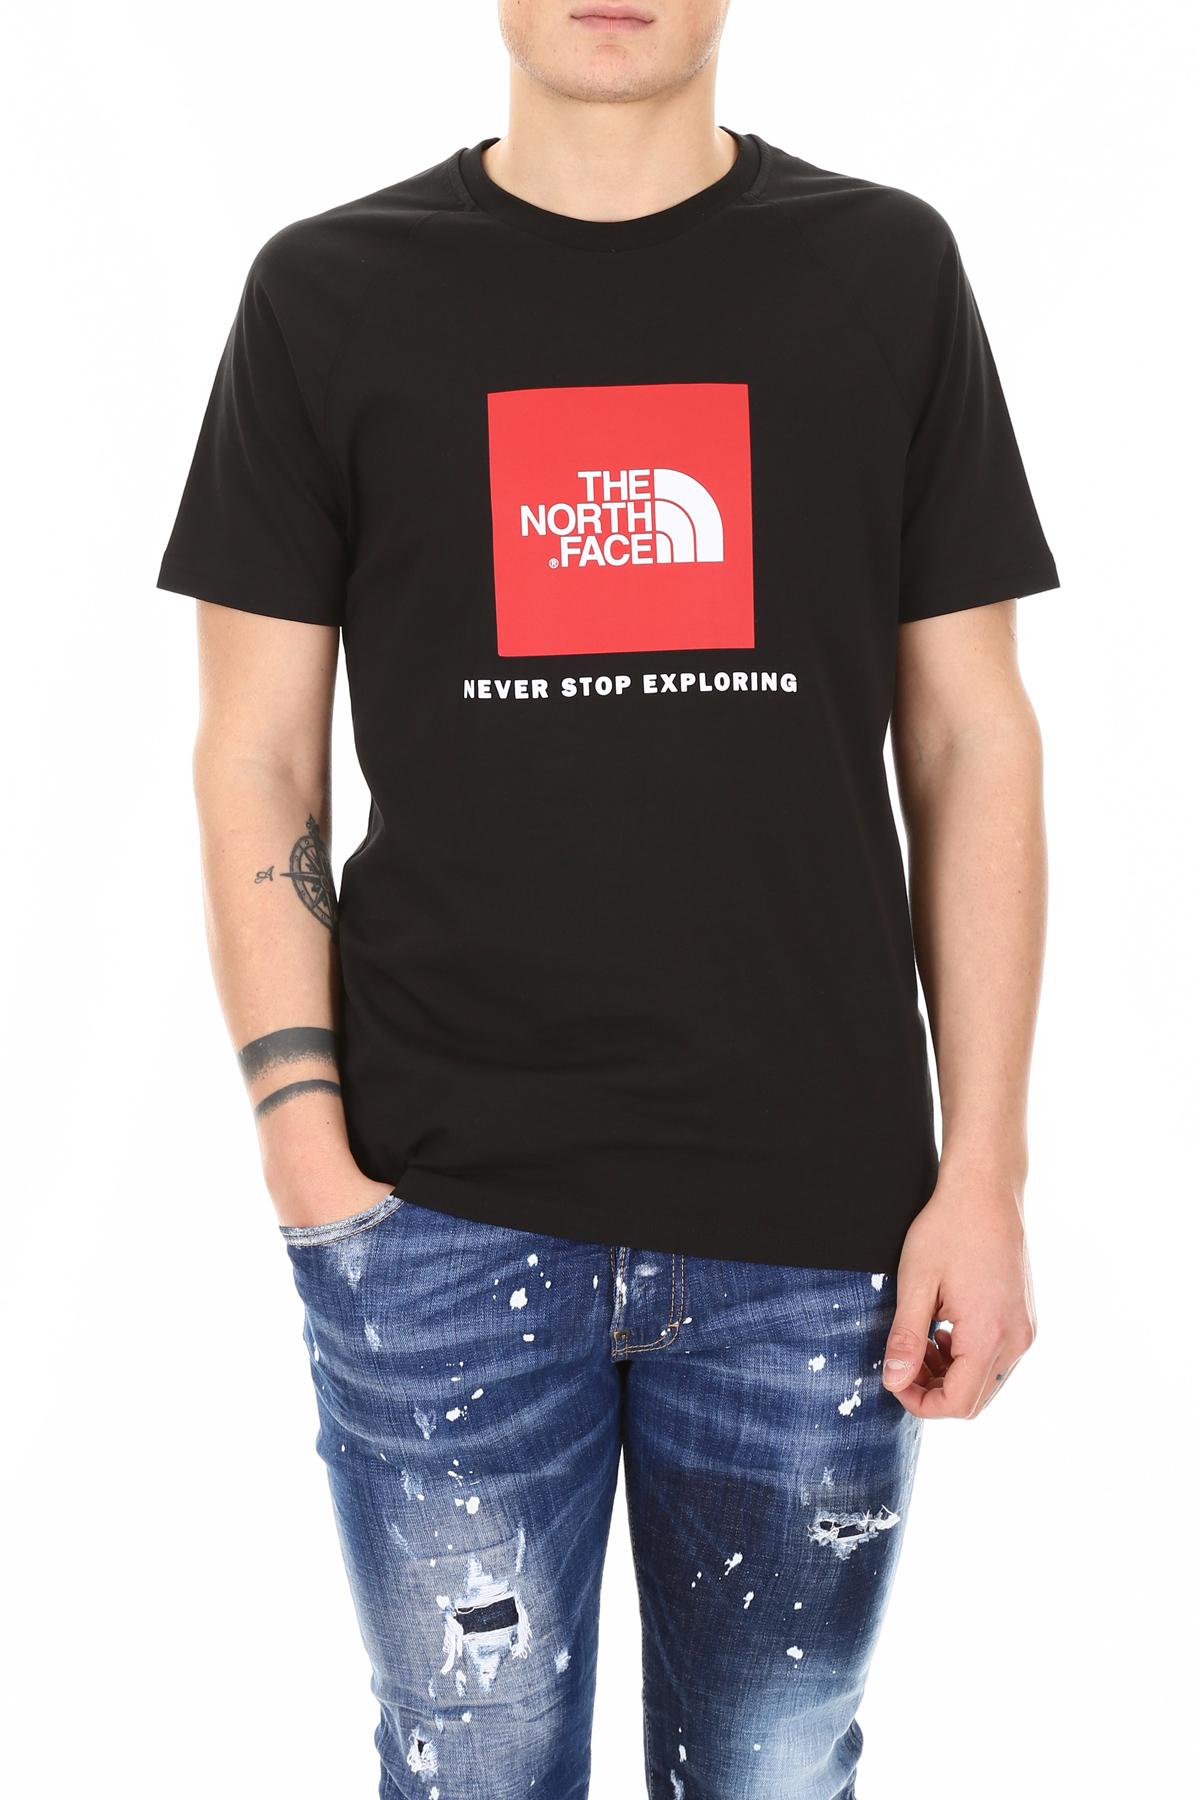 black and red north face t shirt